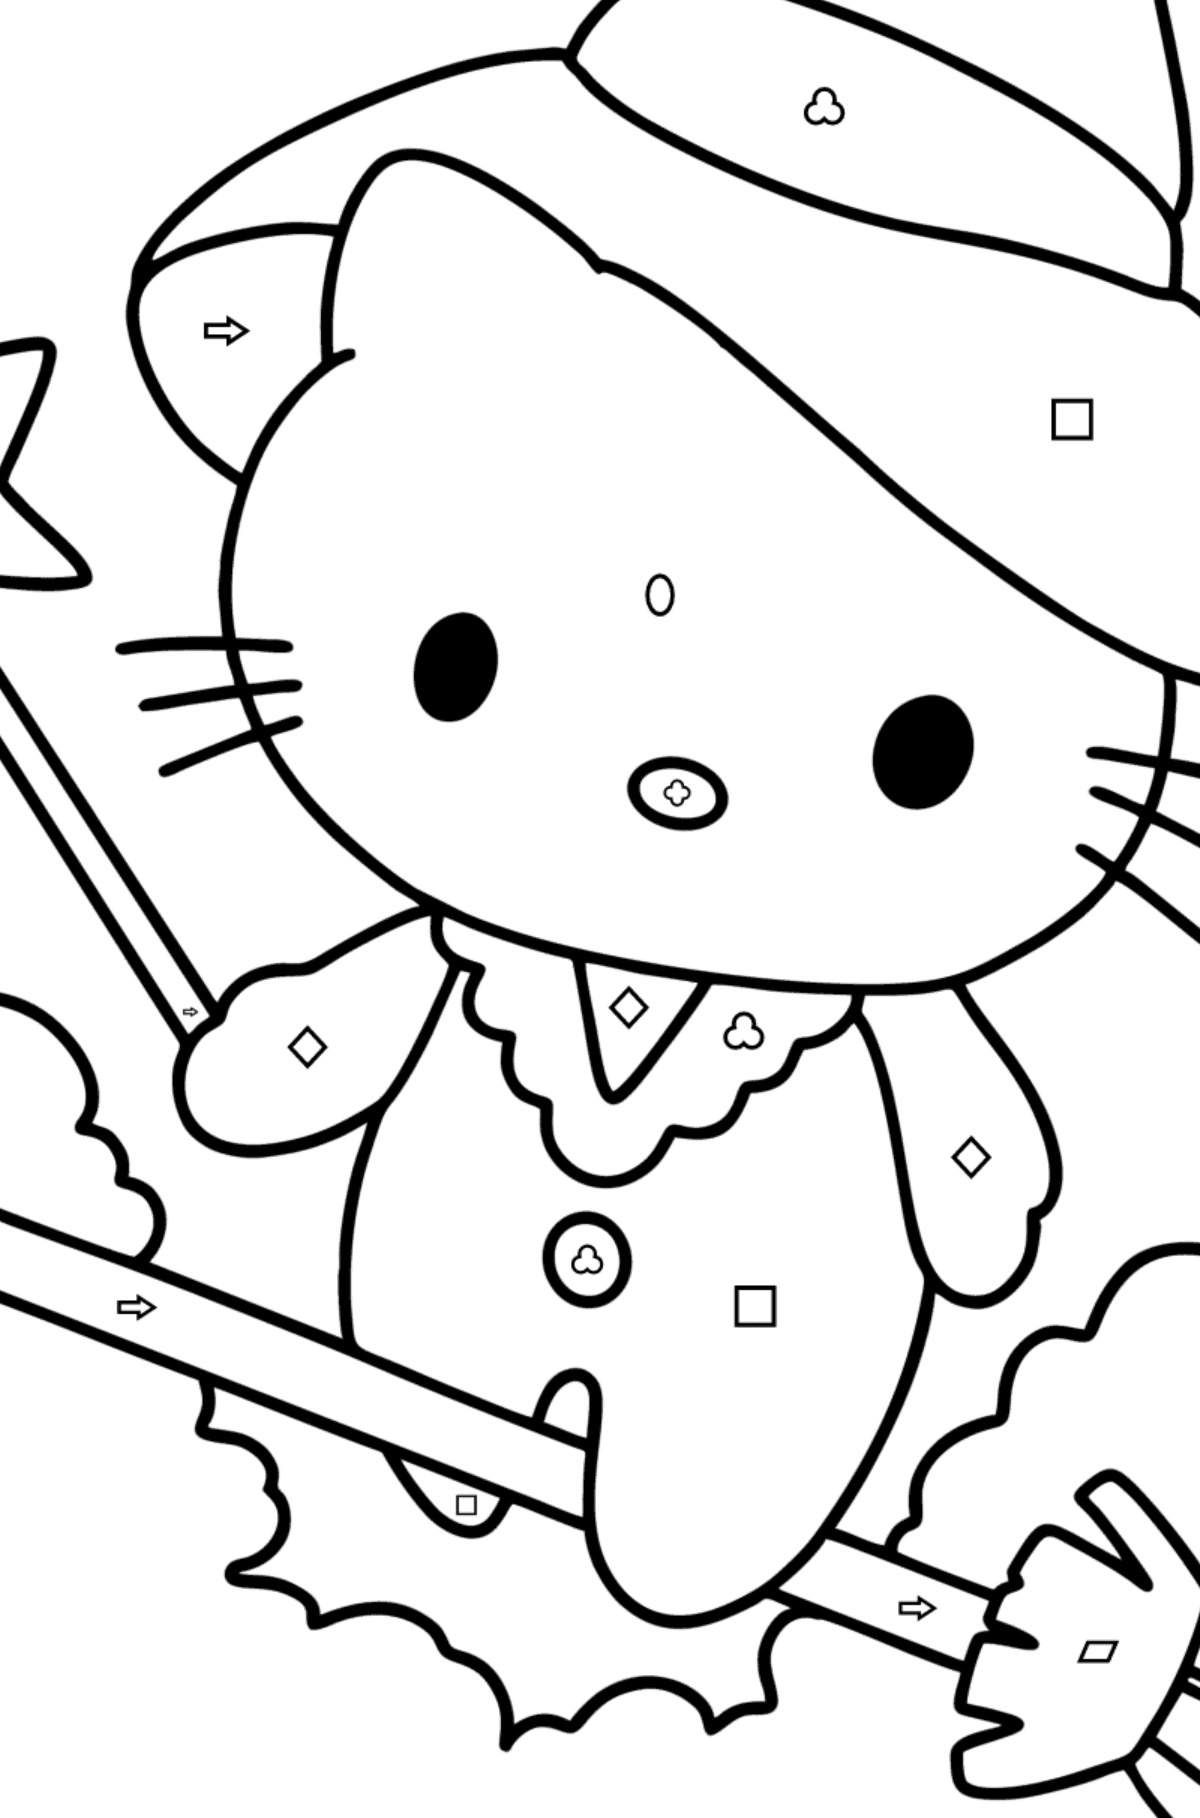 Hello Kitty Halloween coloring page - Coloring by Geometric Shapes for Kids